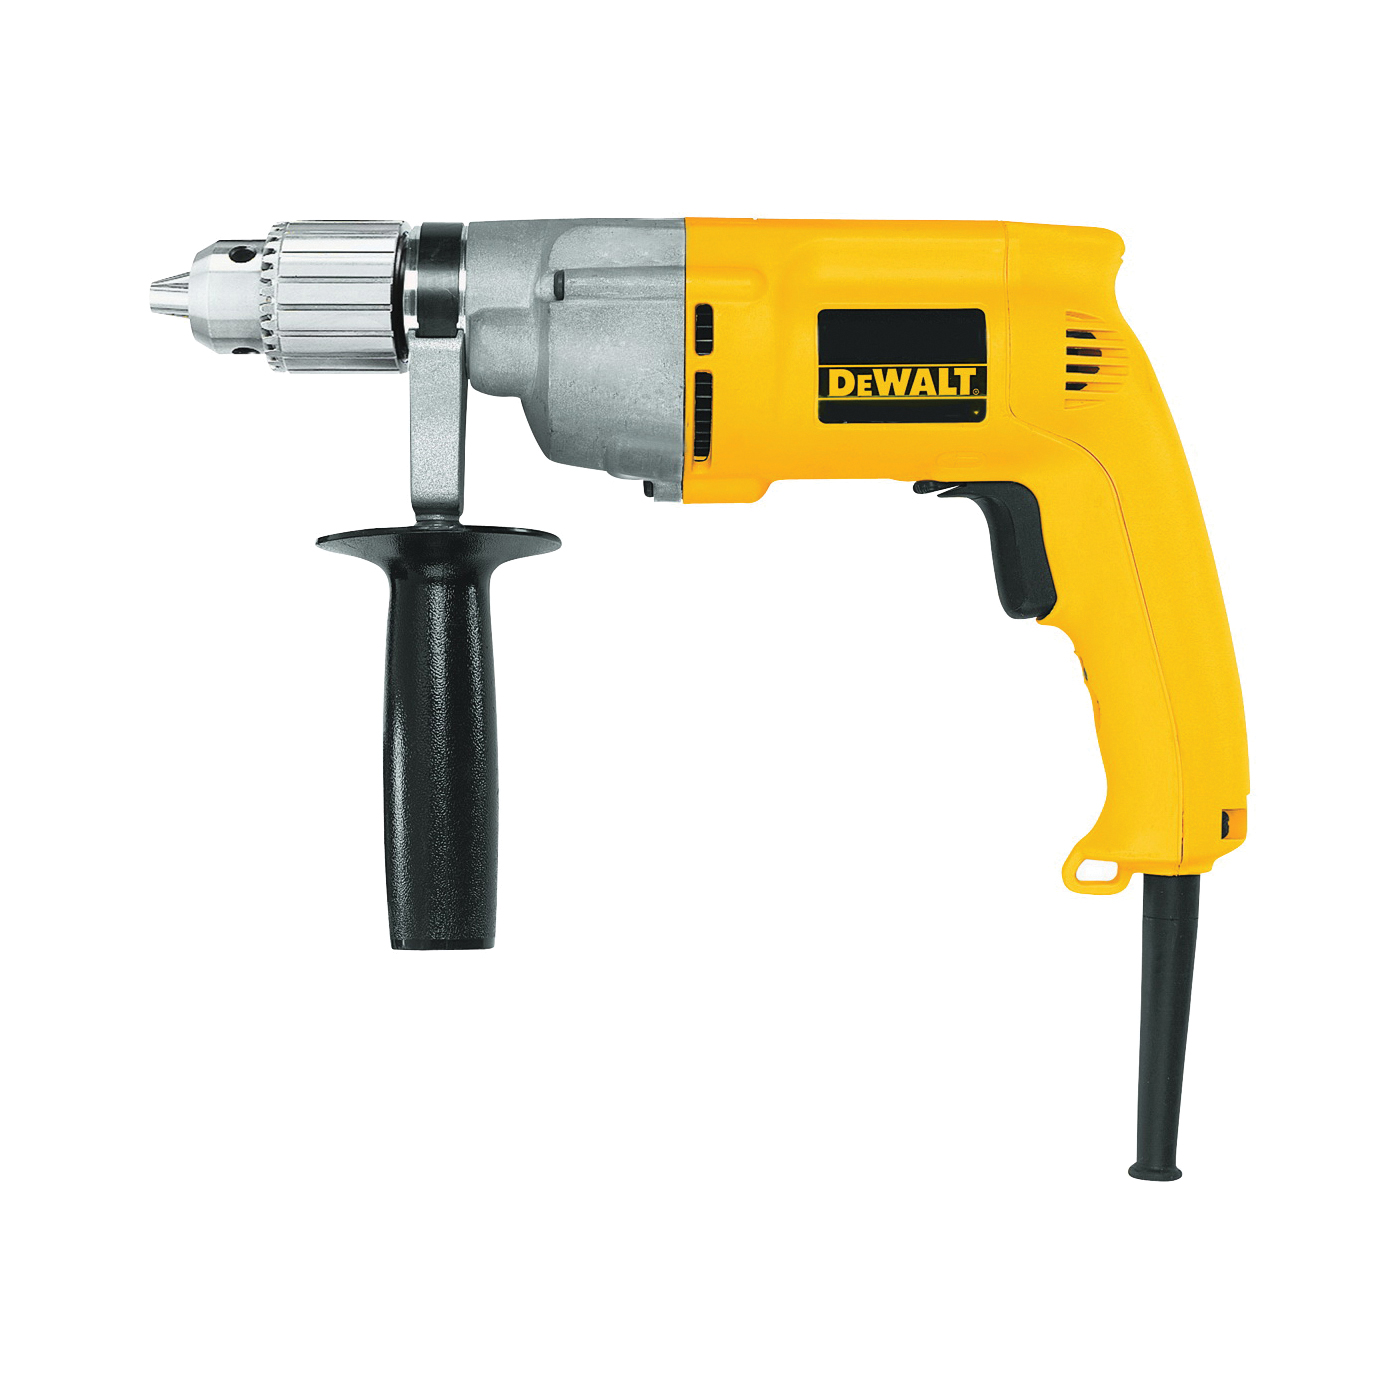 DW245 Electric Drill, 7.8 A, 1/2 in Chuck, Keyed Chuck